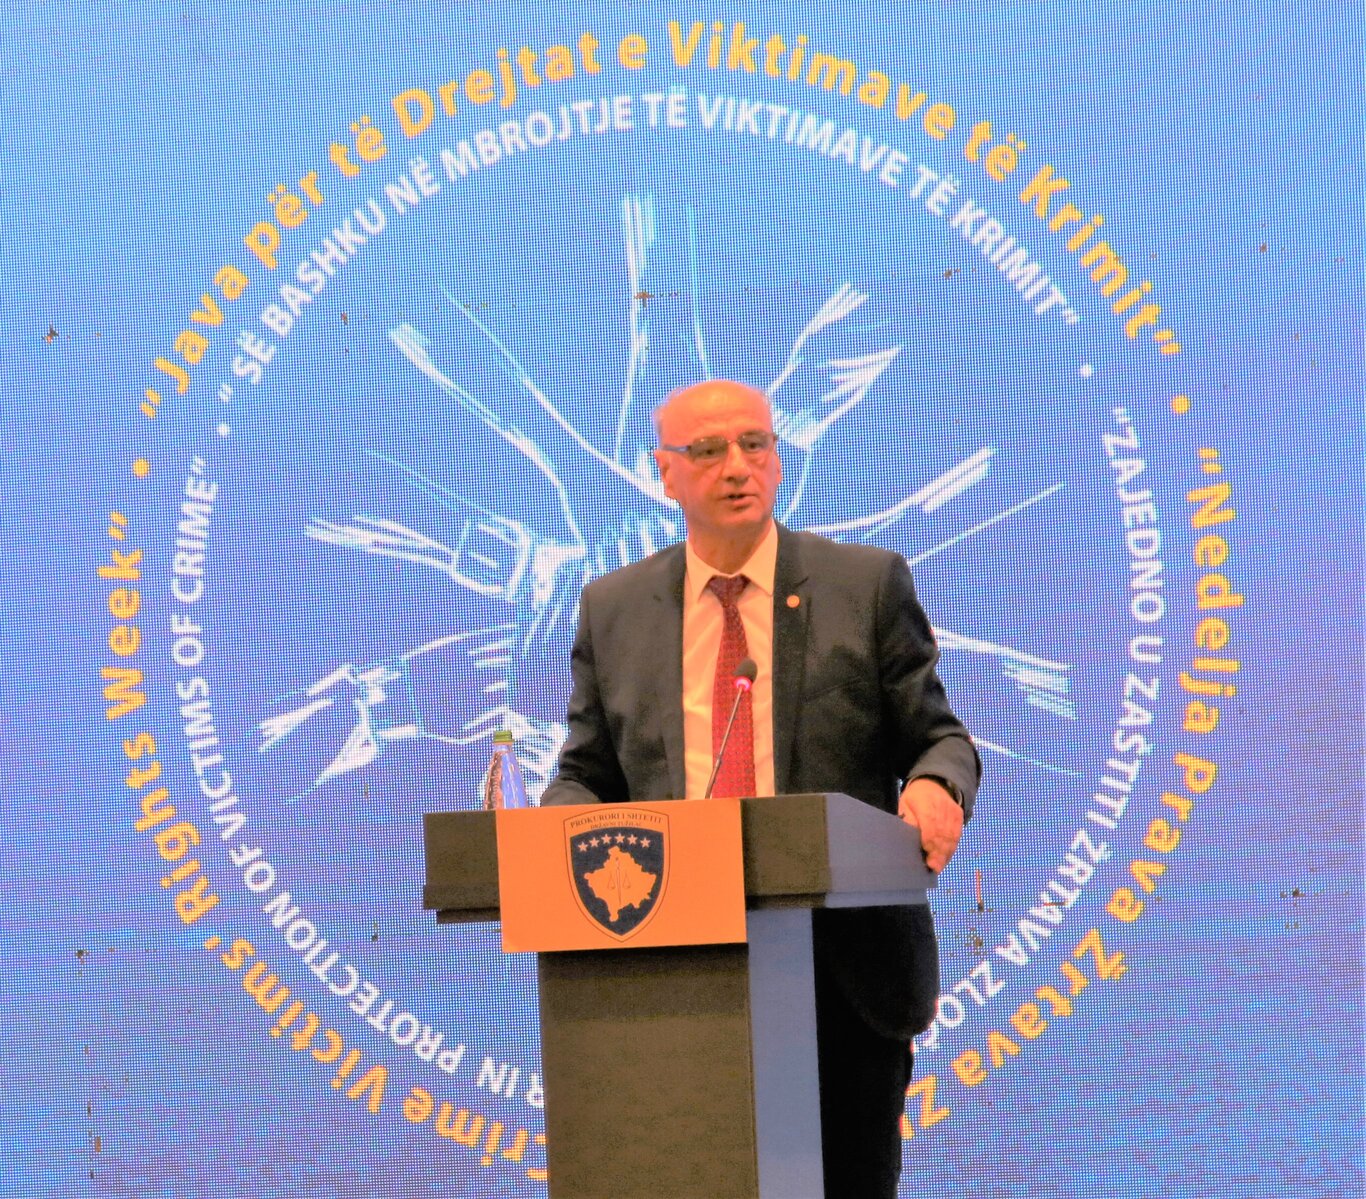 Speech of the Chairman of the Kosovo Prosecutorial Council, Jetish Maloku, on the occasion of the Week for the Rights of Crime Victims